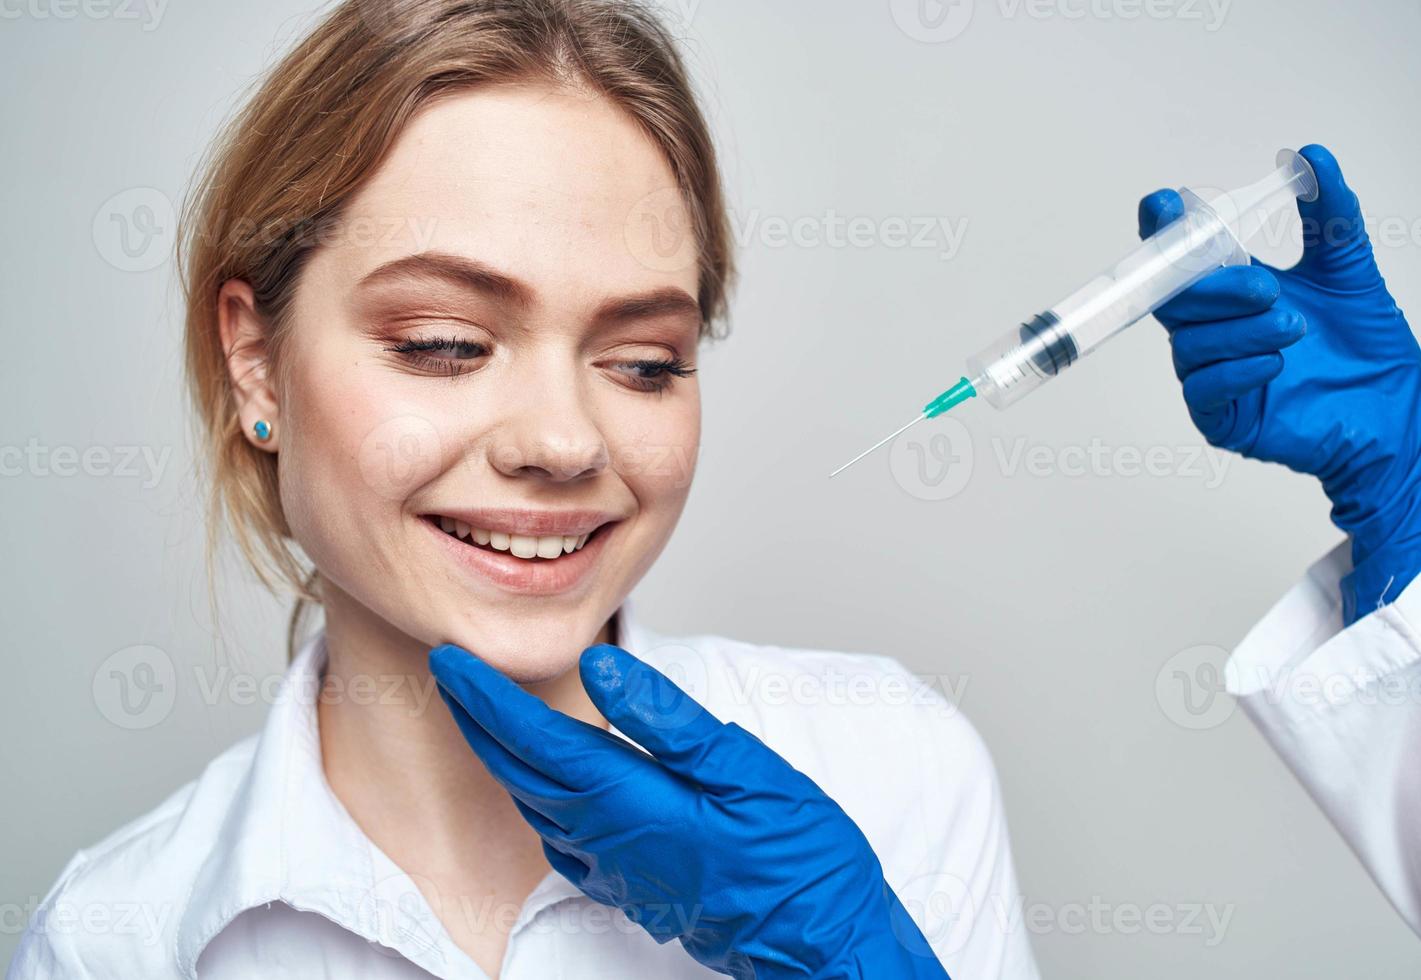 Scared woman and syringe in the hands of the doctor shock emotions model photo